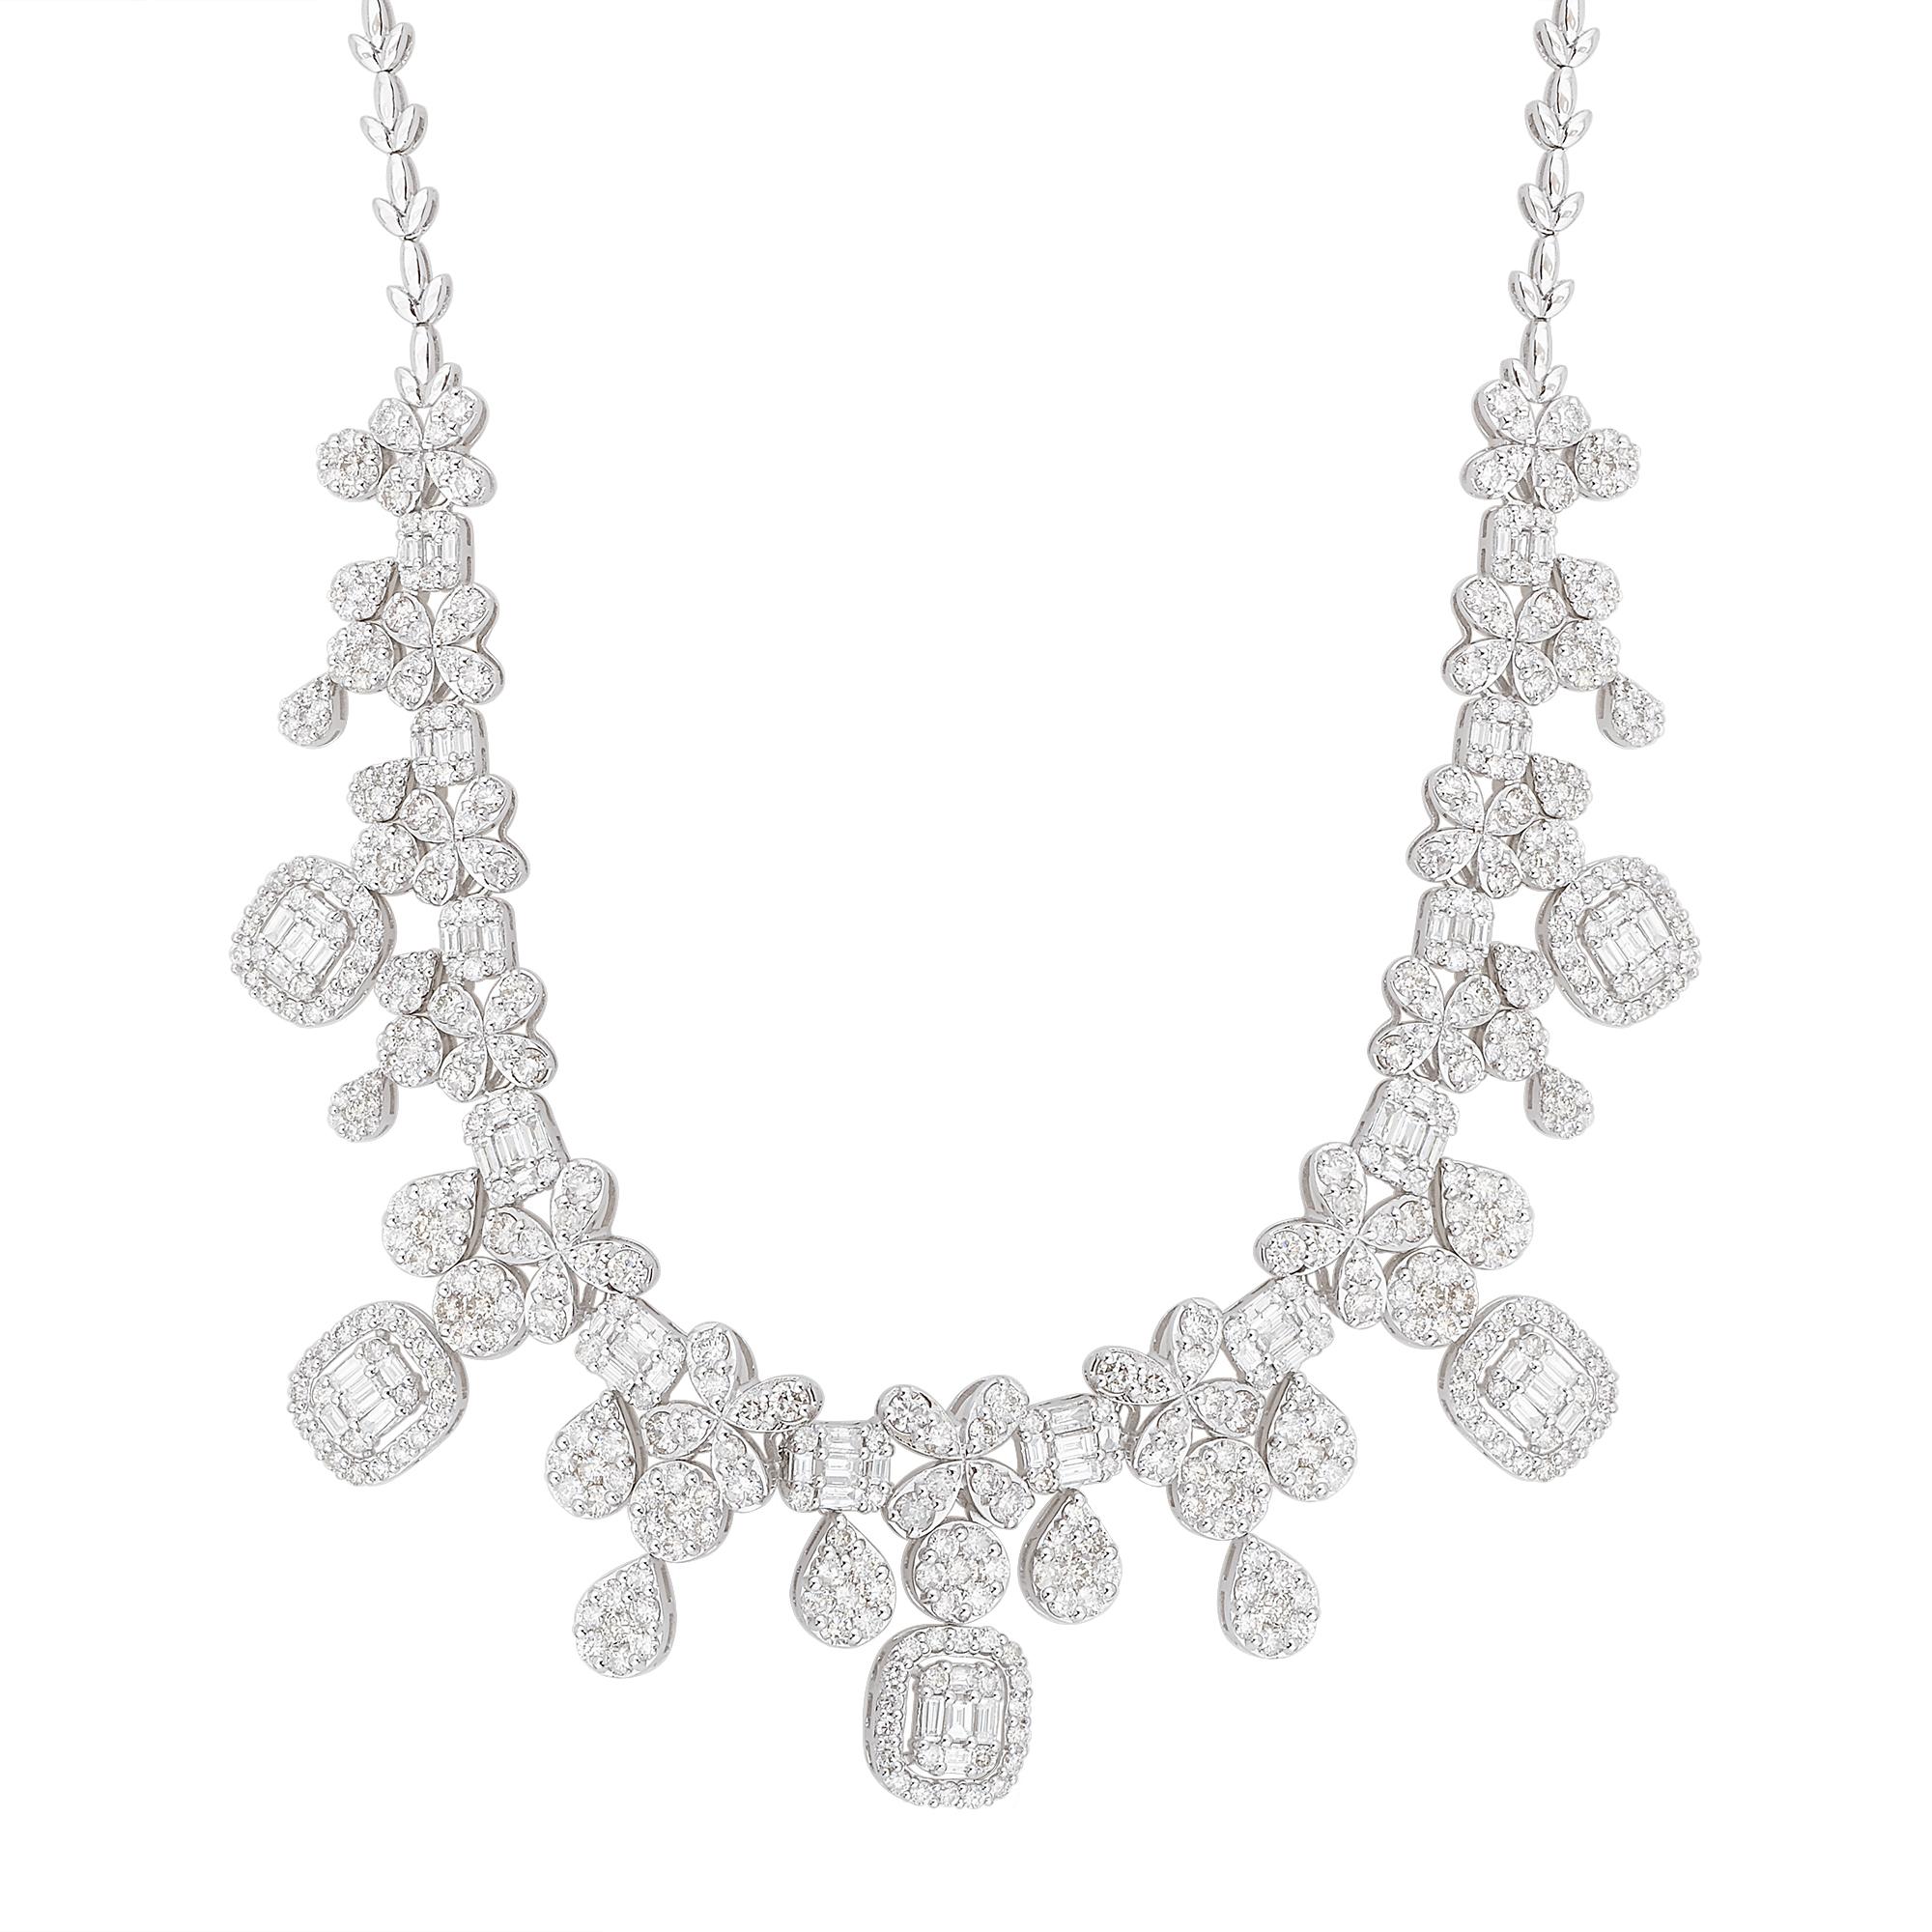 Experience the radiant beauty and timeless allure of this extraordinary necklace, and let it become a symbol of your exquisite taste and discerning style.Indulge in the opulence and magnificence of the 12.10 Carat Baguette Diamond Pendant Necklace,